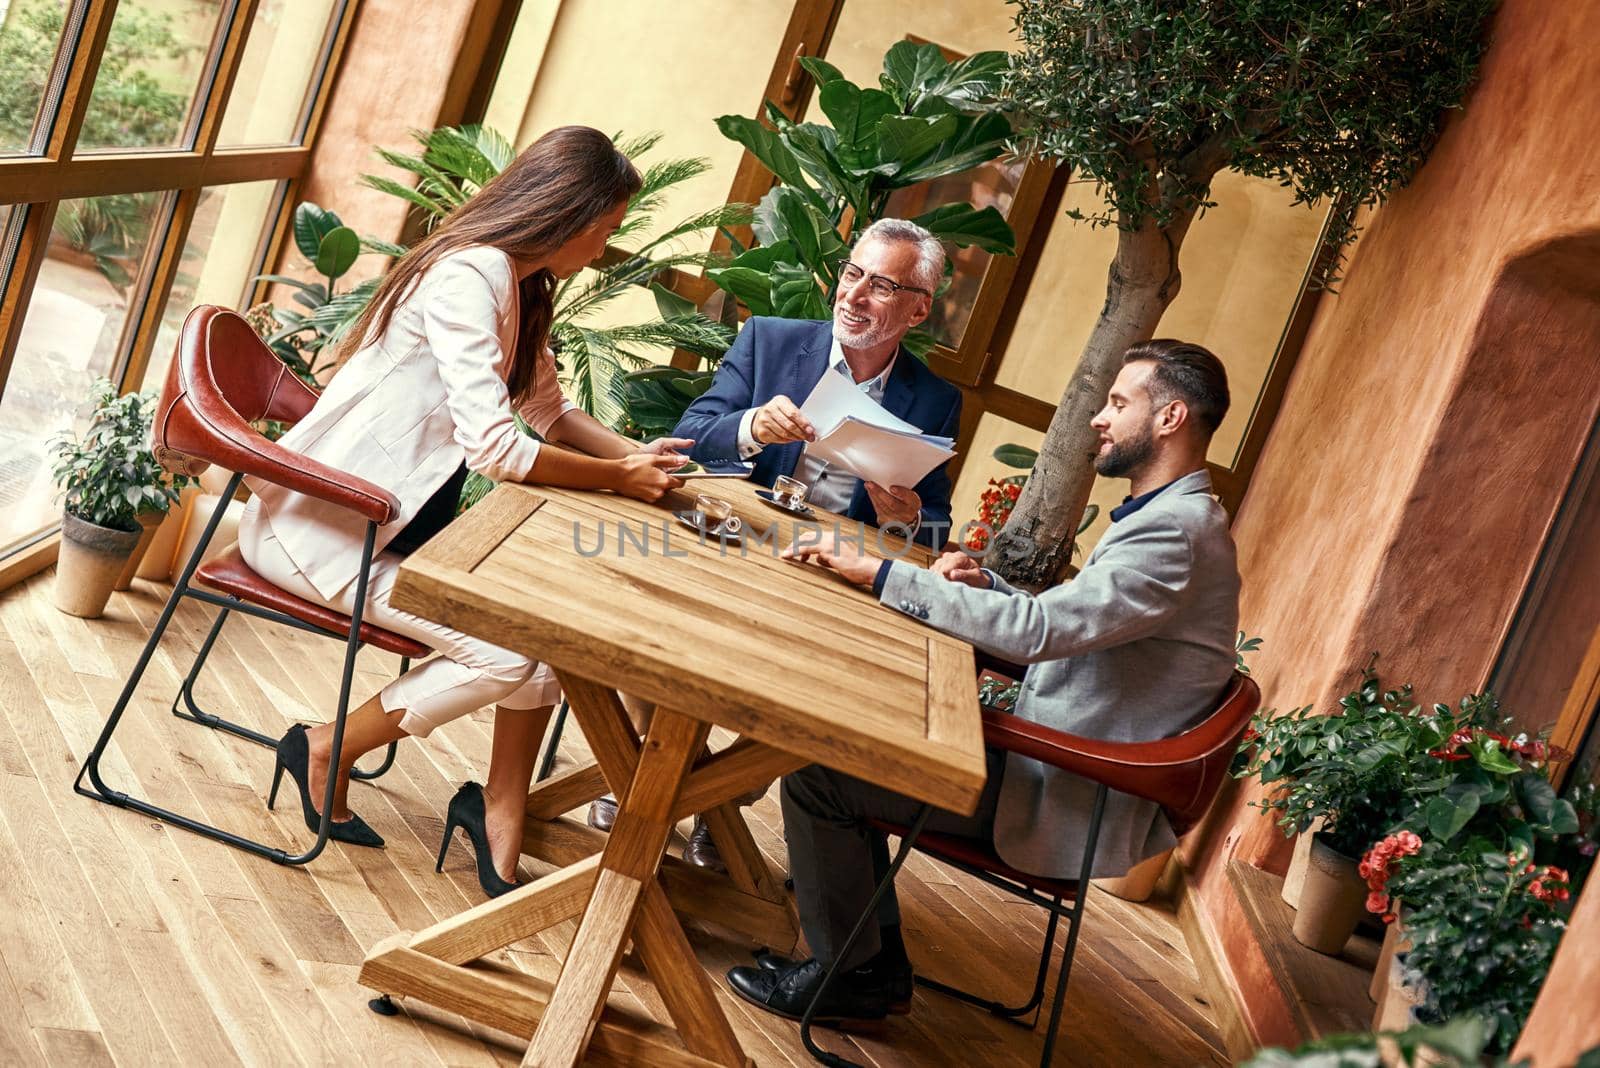 Business lunch. Three people in the restaurant sitting at table drinking hot coffee discussing project joyful. Team work concept by friendsstock